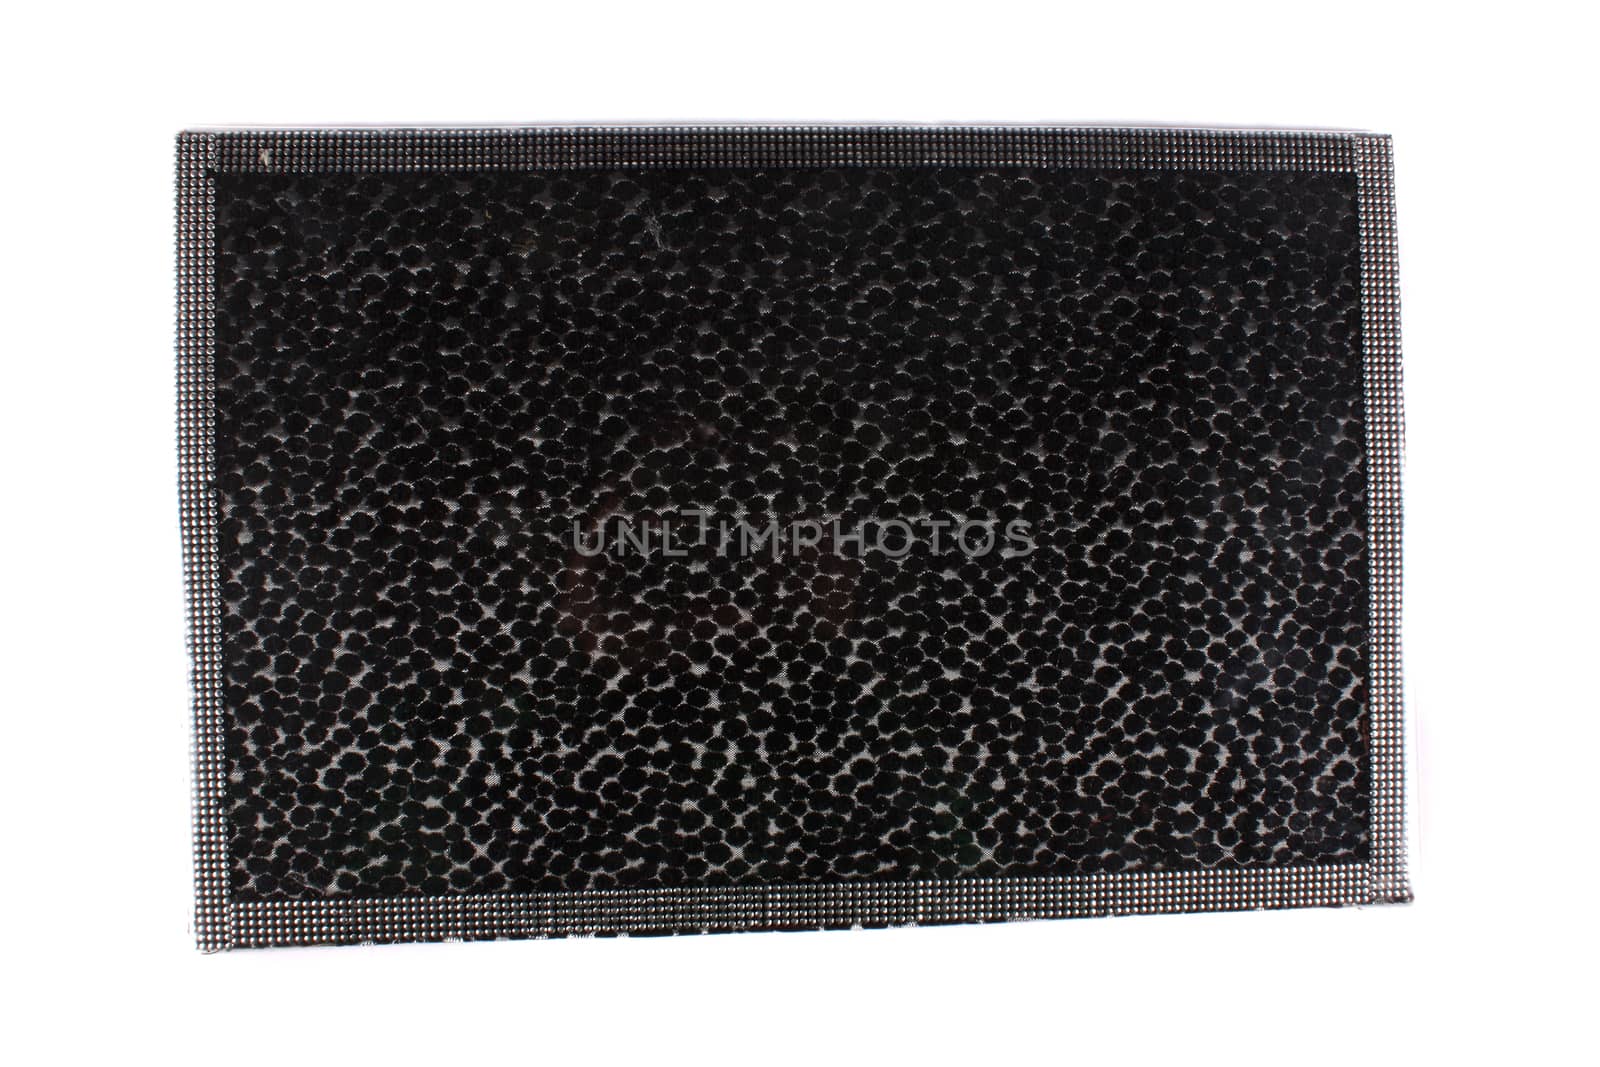 A black luxurious door mat with designer fabric and sequined border.